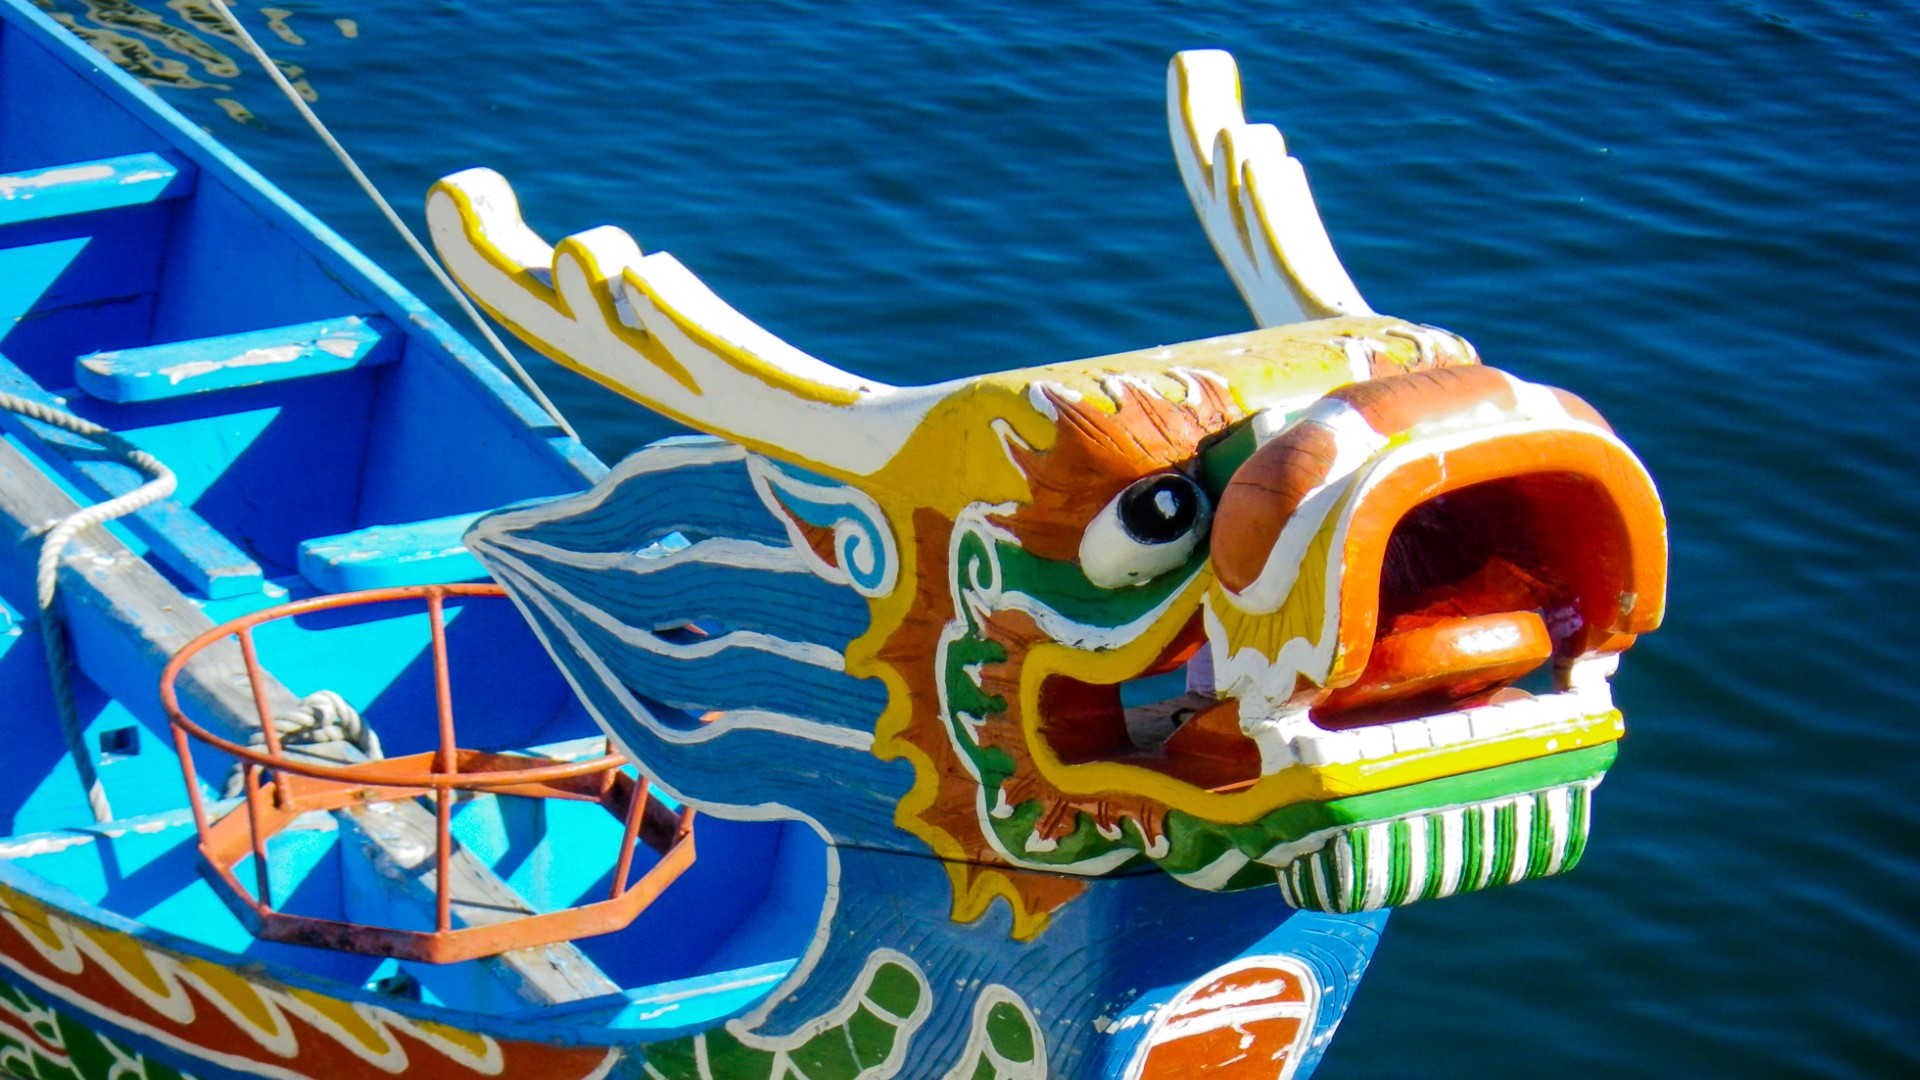 The Colorado Dragon Boat Festival is July 27 and July 28. Here's what you need to know about the event at Sloans Lake.